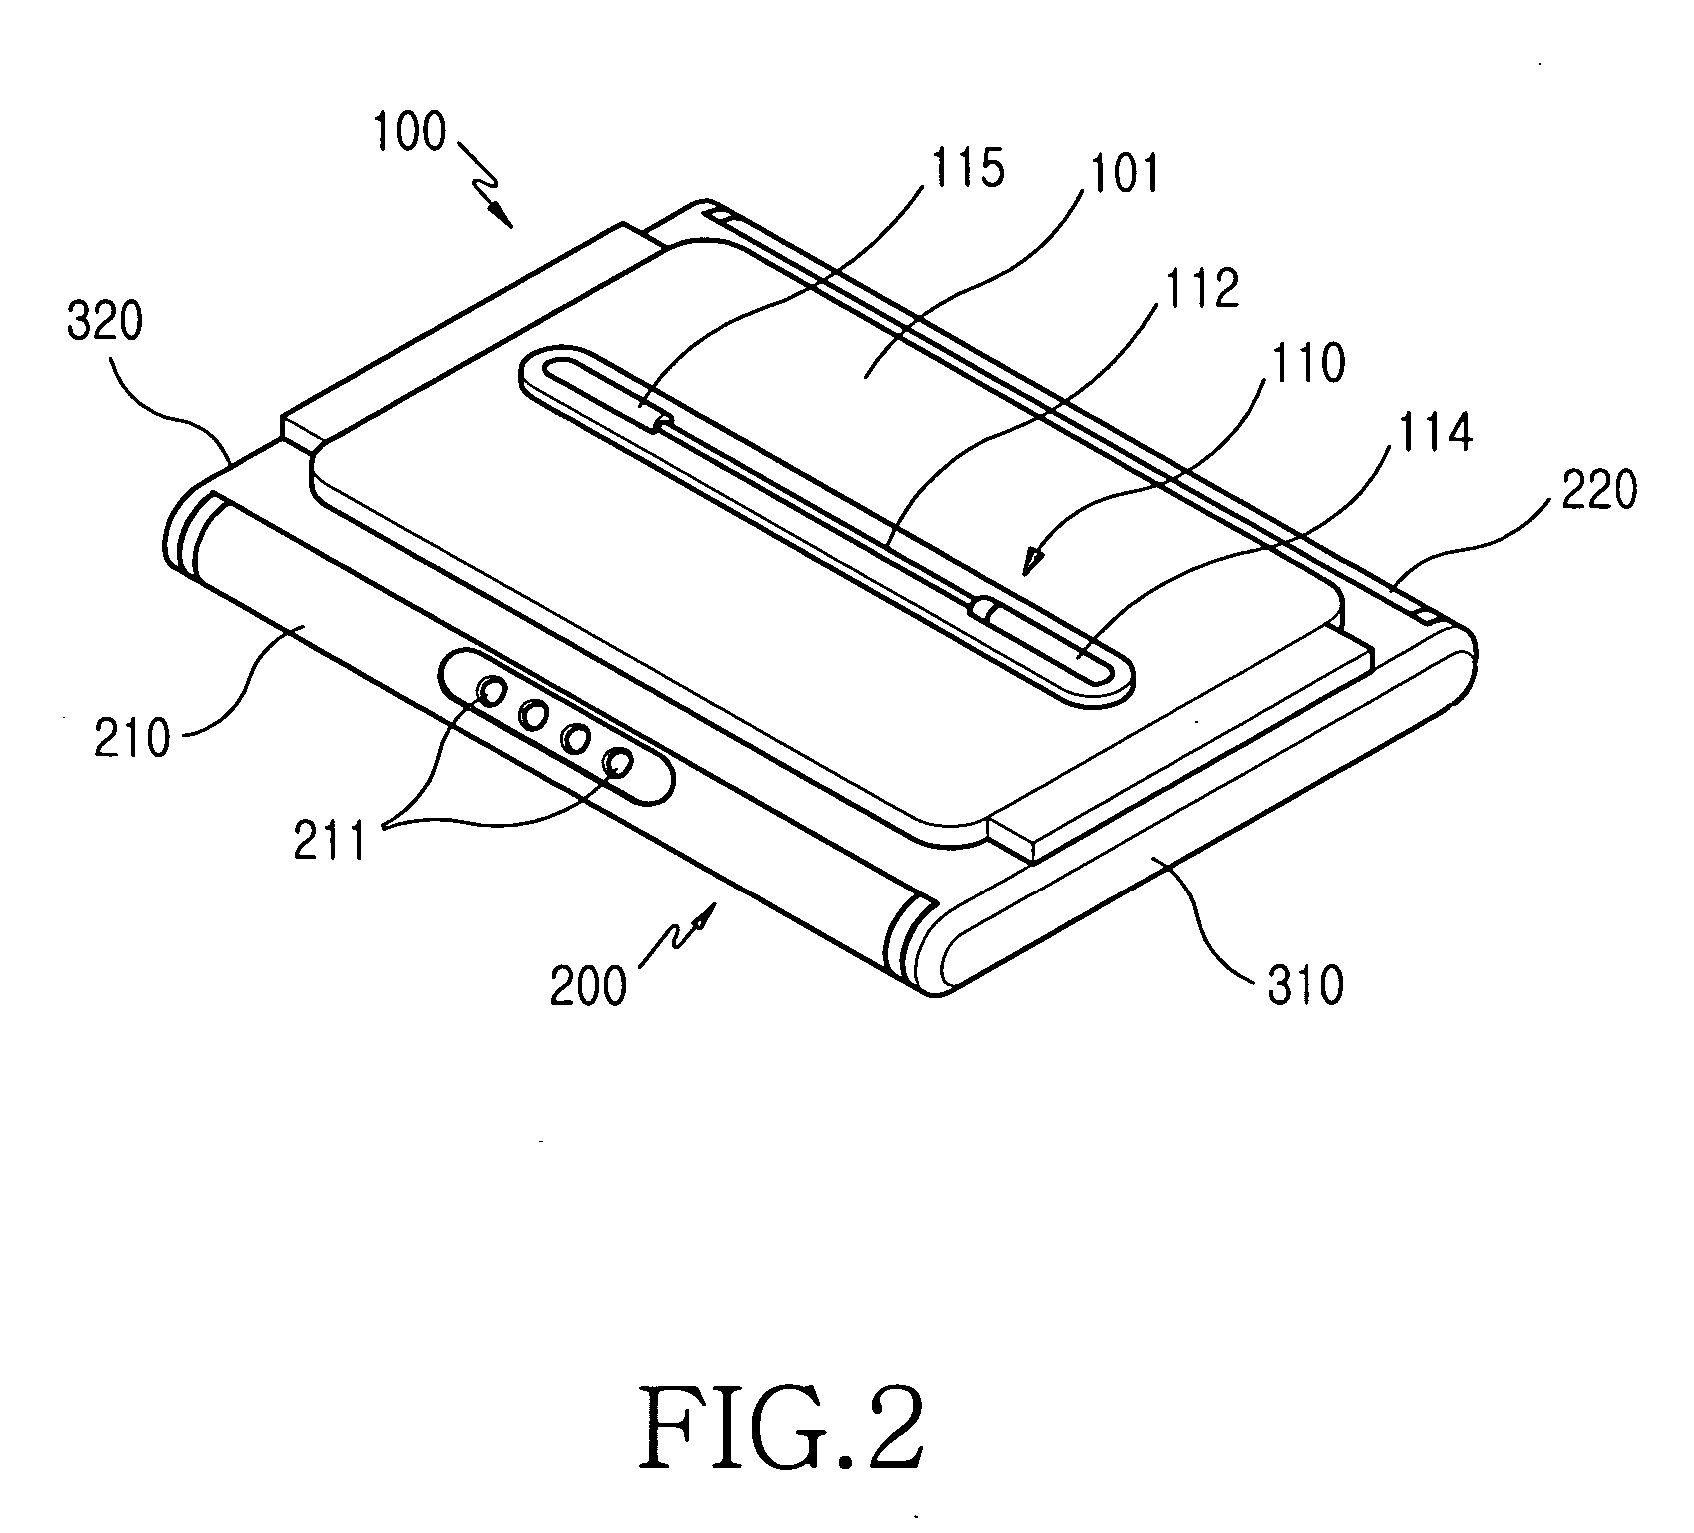 Portable communication terminal for displaying information